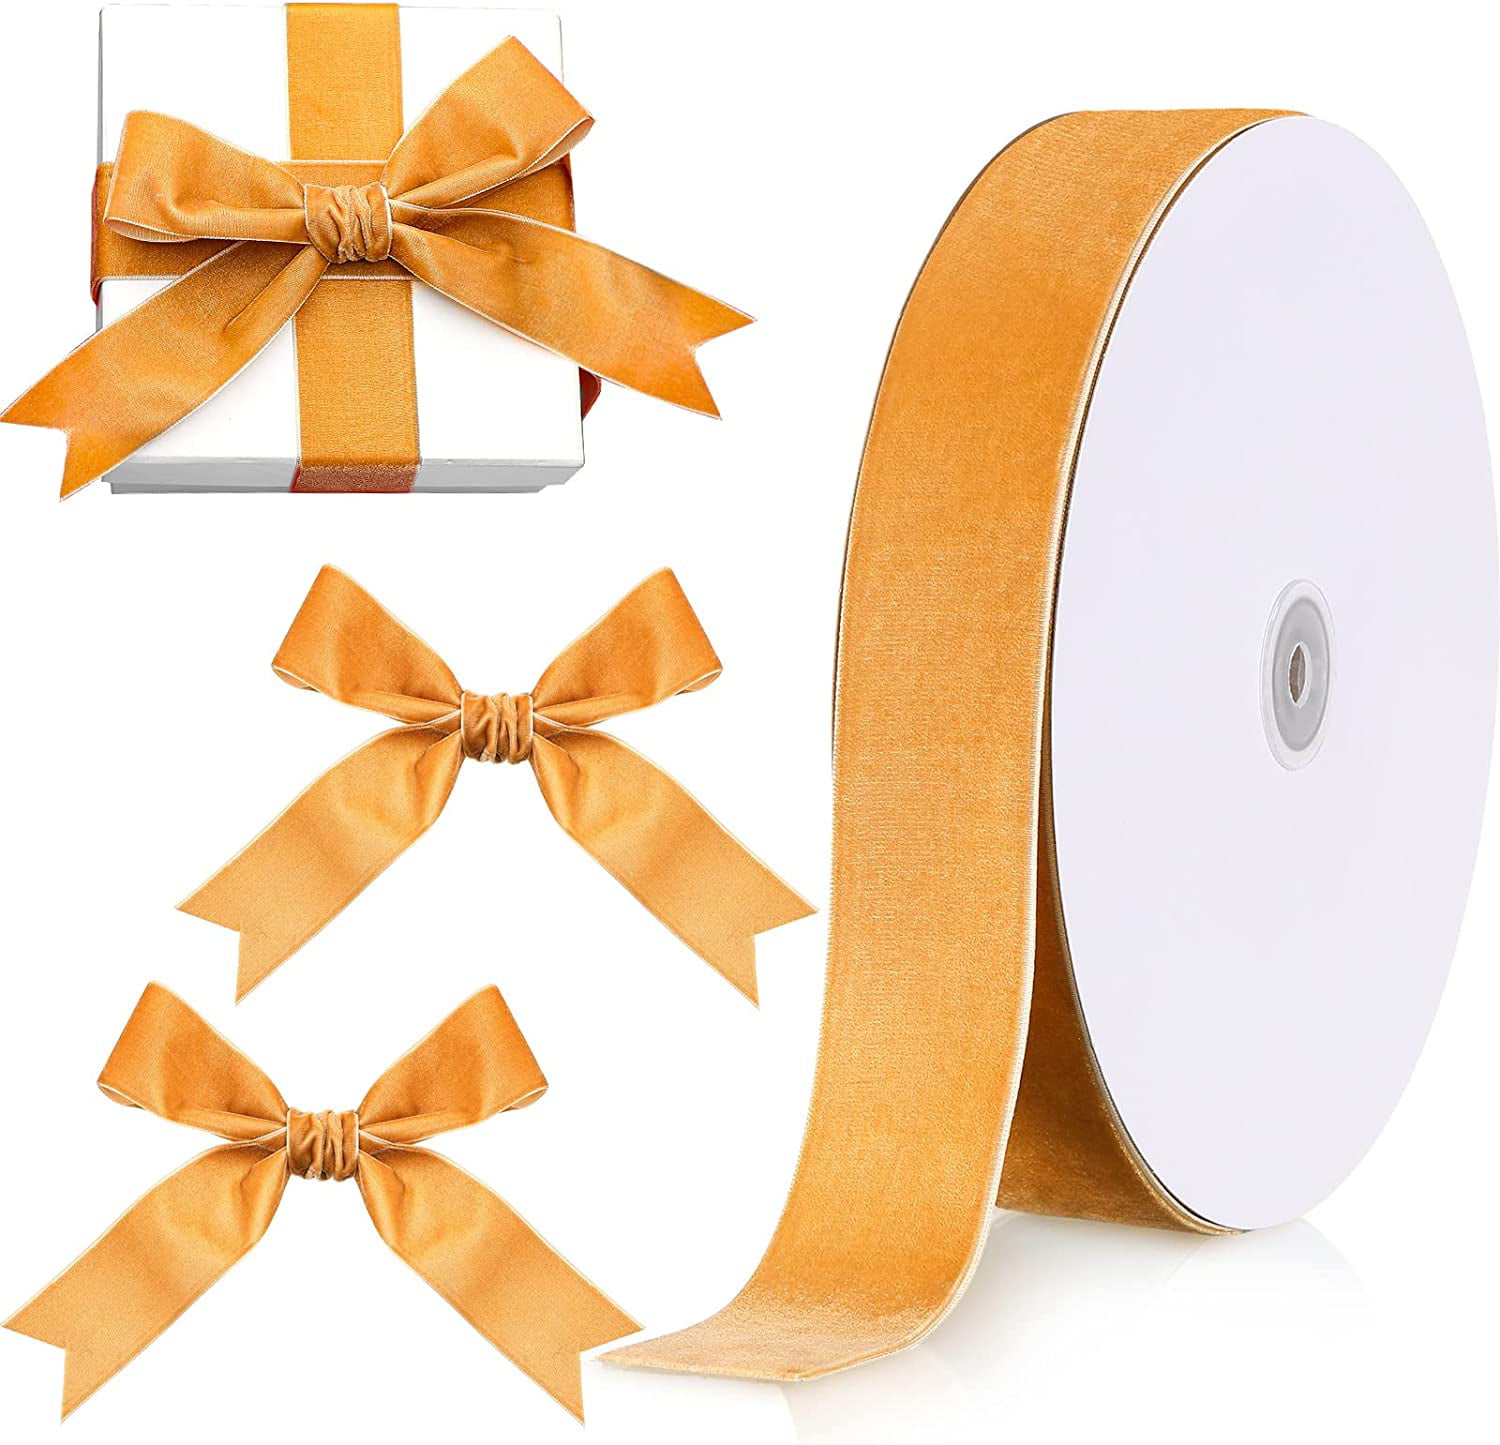 Solid Color Orange Satin Ribbon, 3/4 Inches x 25 Yards Fabric Satin Ribbon for Gift Wrapping, Crafts, Hair Bows Making, Wreath, Wedding Party